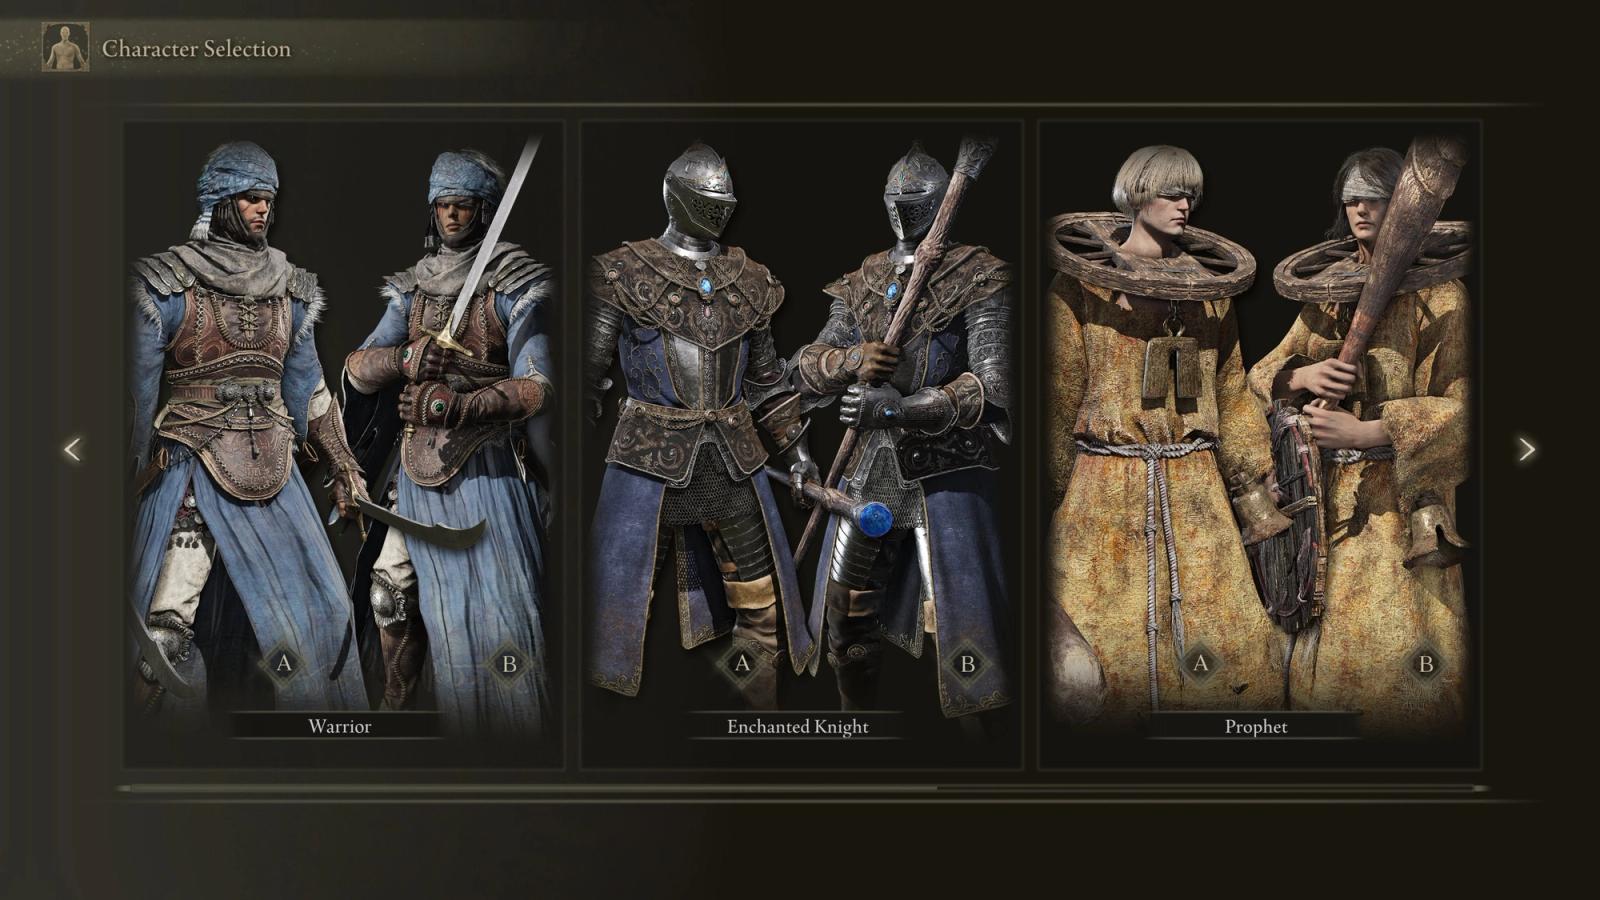 Elden Ring classes; the Warrior, Enchanted Knight, and the Prophet.